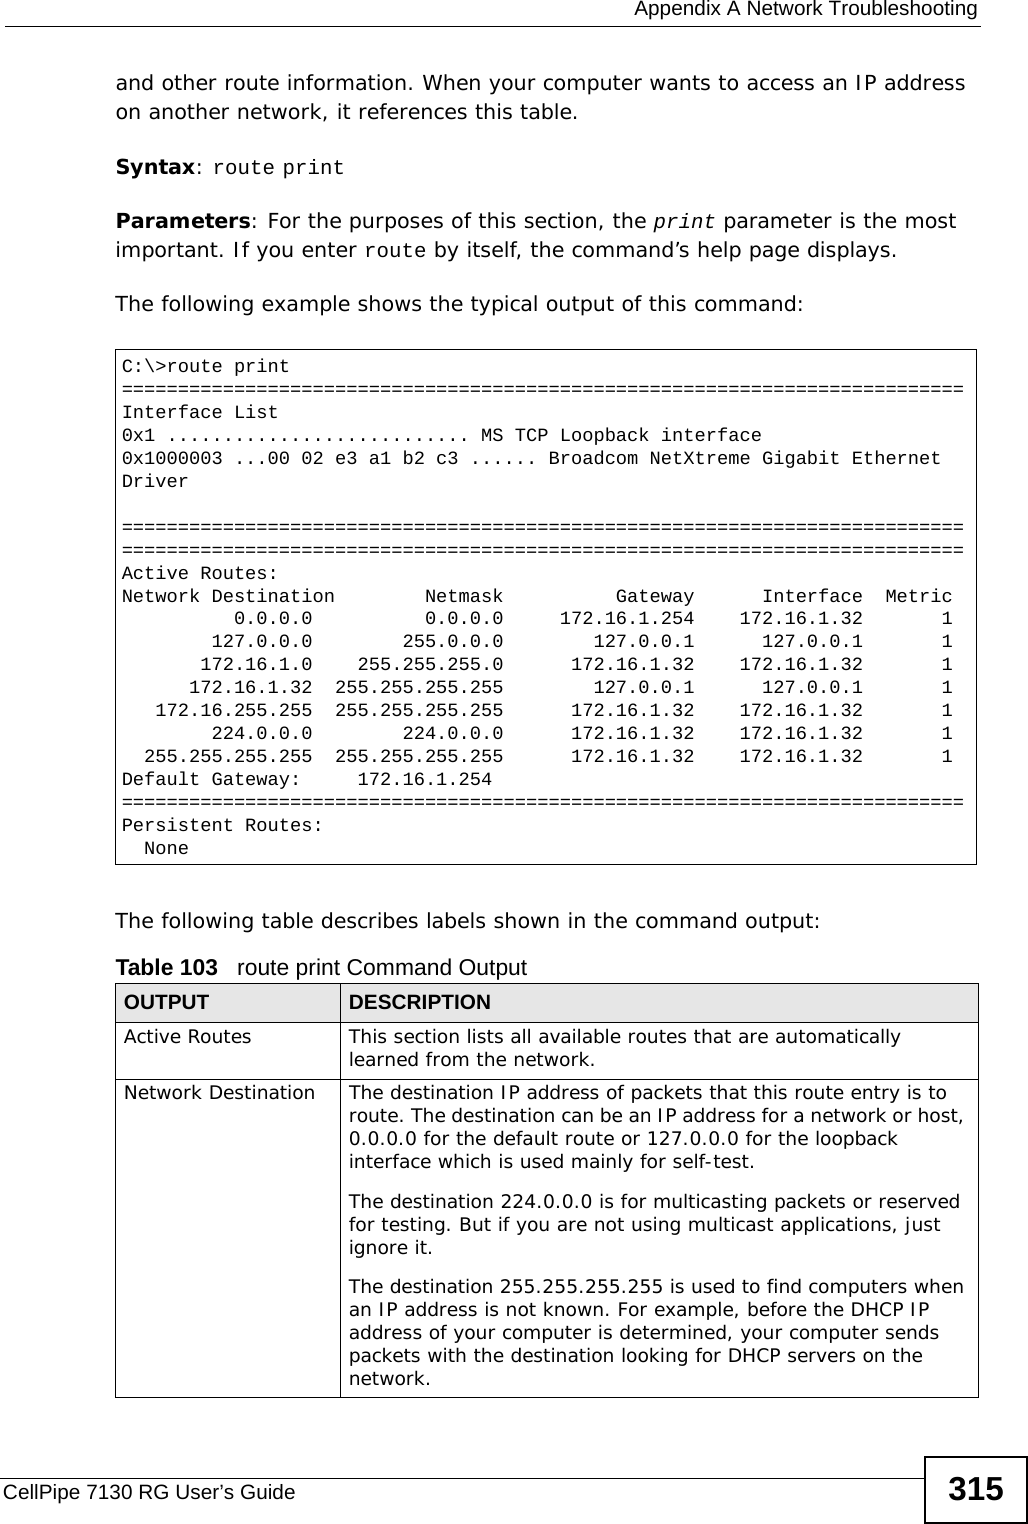  Appendix A Network TroubleshootingCellPipe 7130 RG User’s Guide 315and other route information. When your computer wants to access an IP address on another network, it references this table.Syntax: route printParameters: For the purposes of this section, the print parameter is the most important. If you enter route by itself, the command’s help page displays.The following example shows the typical output of this command:  The following table describes labels shown in the command output:C:\&gt;route print===========================================================================Interface List0x1 ........................... MS TCP Loopback interface0x1000003 ...00 02 e3 a1 b2 c3 ...... Broadcom NetXtreme Gigabit Ethernet Driver======================================================================================================================================================Active Routes:Network Destination        Netmask          Gateway      Interface  Metric          0.0.0.0          0.0.0.0     172.16.1.254    172.16.1.32       1        127.0.0.0        255.0.0.0        127.0.0.1      127.0.0.1       1       172.16.1.0    255.255.255.0      172.16.1.32    172.16.1.32       1      172.16.1.32  255.255.255.255        127.0.0.1      127.0.0.1       1   172.16.255.255  255.255.255.255      172.16.1.32    172.16.1.32       1        224.0.0.0        224.0.0.0      172.16.1.32    172.16.1.32       1  255.255.255.255  255.255.255.255      172.16.1.32    172.16.1.32       1Default Gateway:     172.16.1.254===========================================================================Persistent Routes:  NoneTable 103   route print Command OutputOUTPUT DESCRIPTIONActive Routes This section lists all available routes that are automatically learned from the network. Network Destination The destination IP address of packets that this route entry is to route. The destination can be an IP address for a network or host, 0.0.0.0 for the default route or 127.0.0.0 for the loopback interface which is used mainly for self-test. The destination 224.0.0.0 is for multicasting packets or reserved for testing. But if you are not using multicast applications, just ignore it.The destination 255.255.255.255 is used to find computers when an IP address is not known. For example, before the DHCP IP address of your computer is determined, your computer sends packets with the destination looking for DHCP servers on the network.